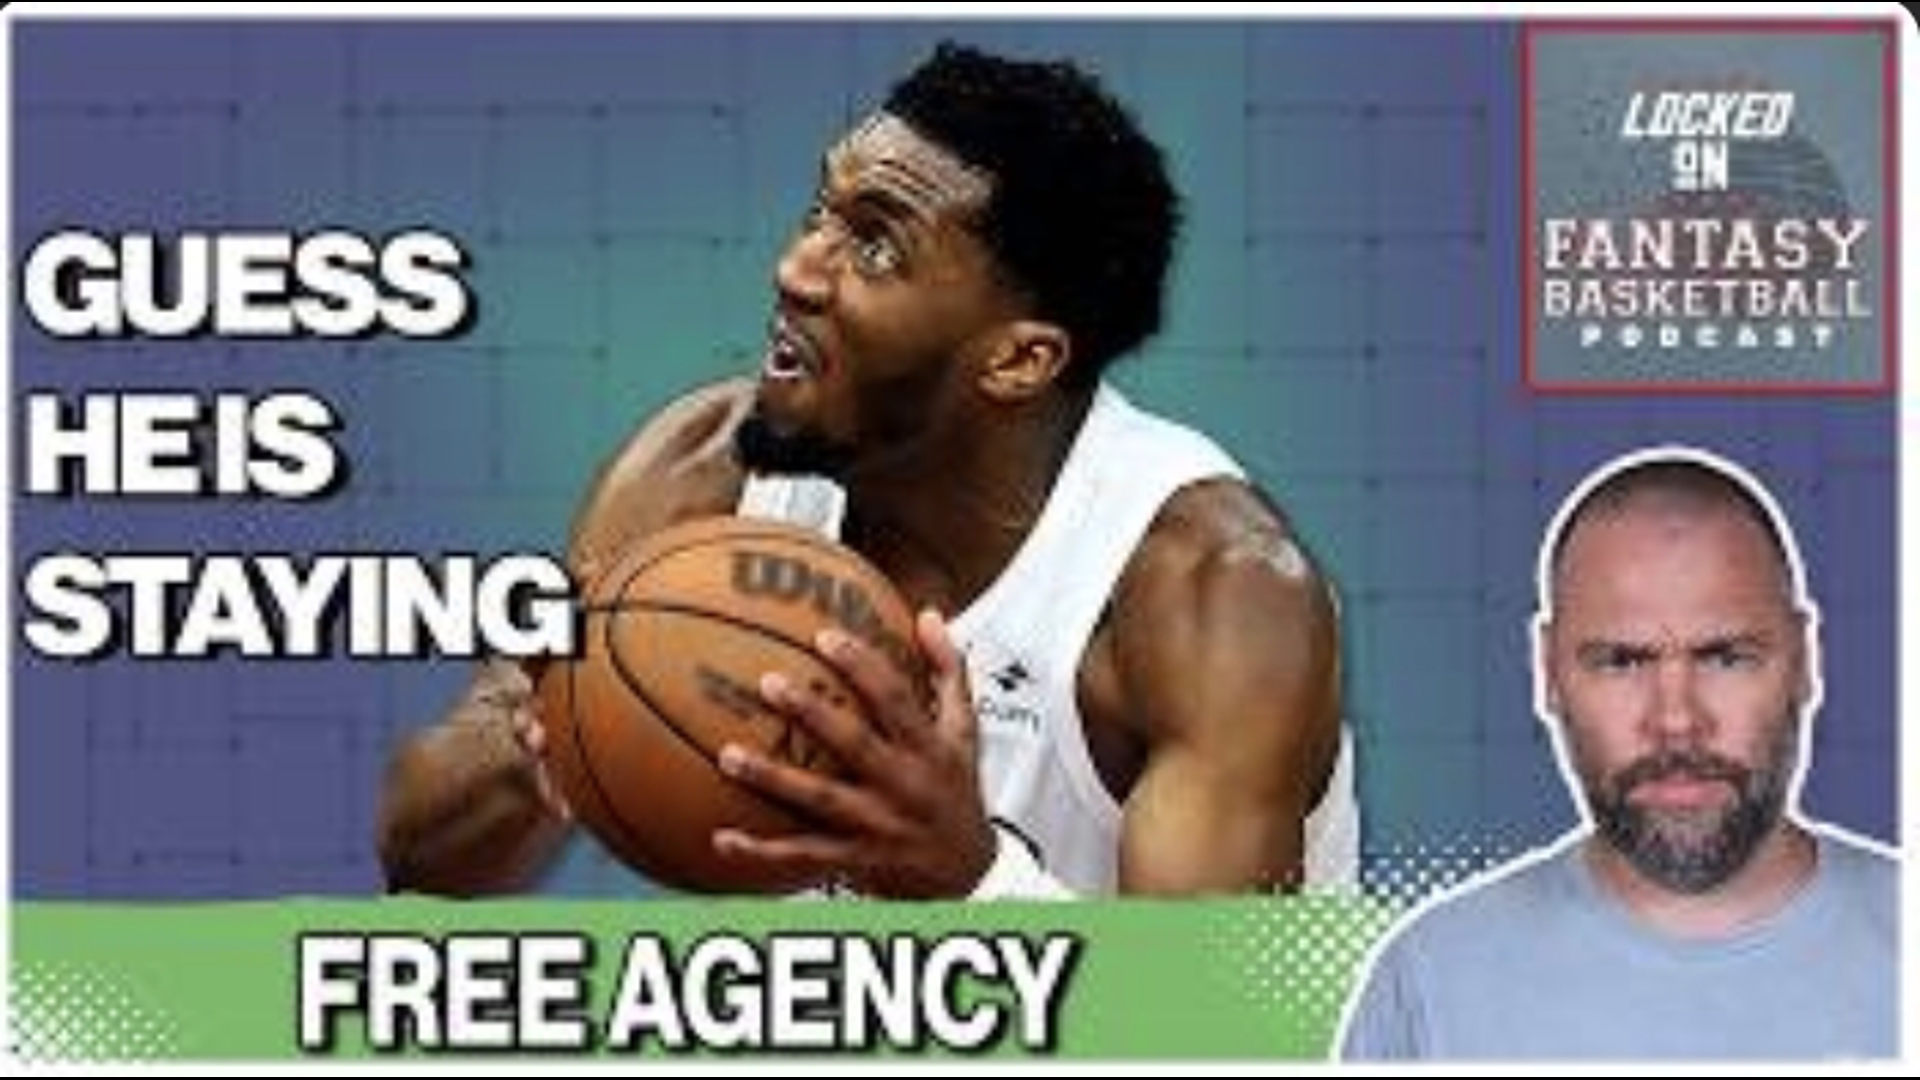 In today's Locked On Fantasy Basketball Podcast, Josh Lloyd covers the key moves and signings from the third day of NBA free agency.